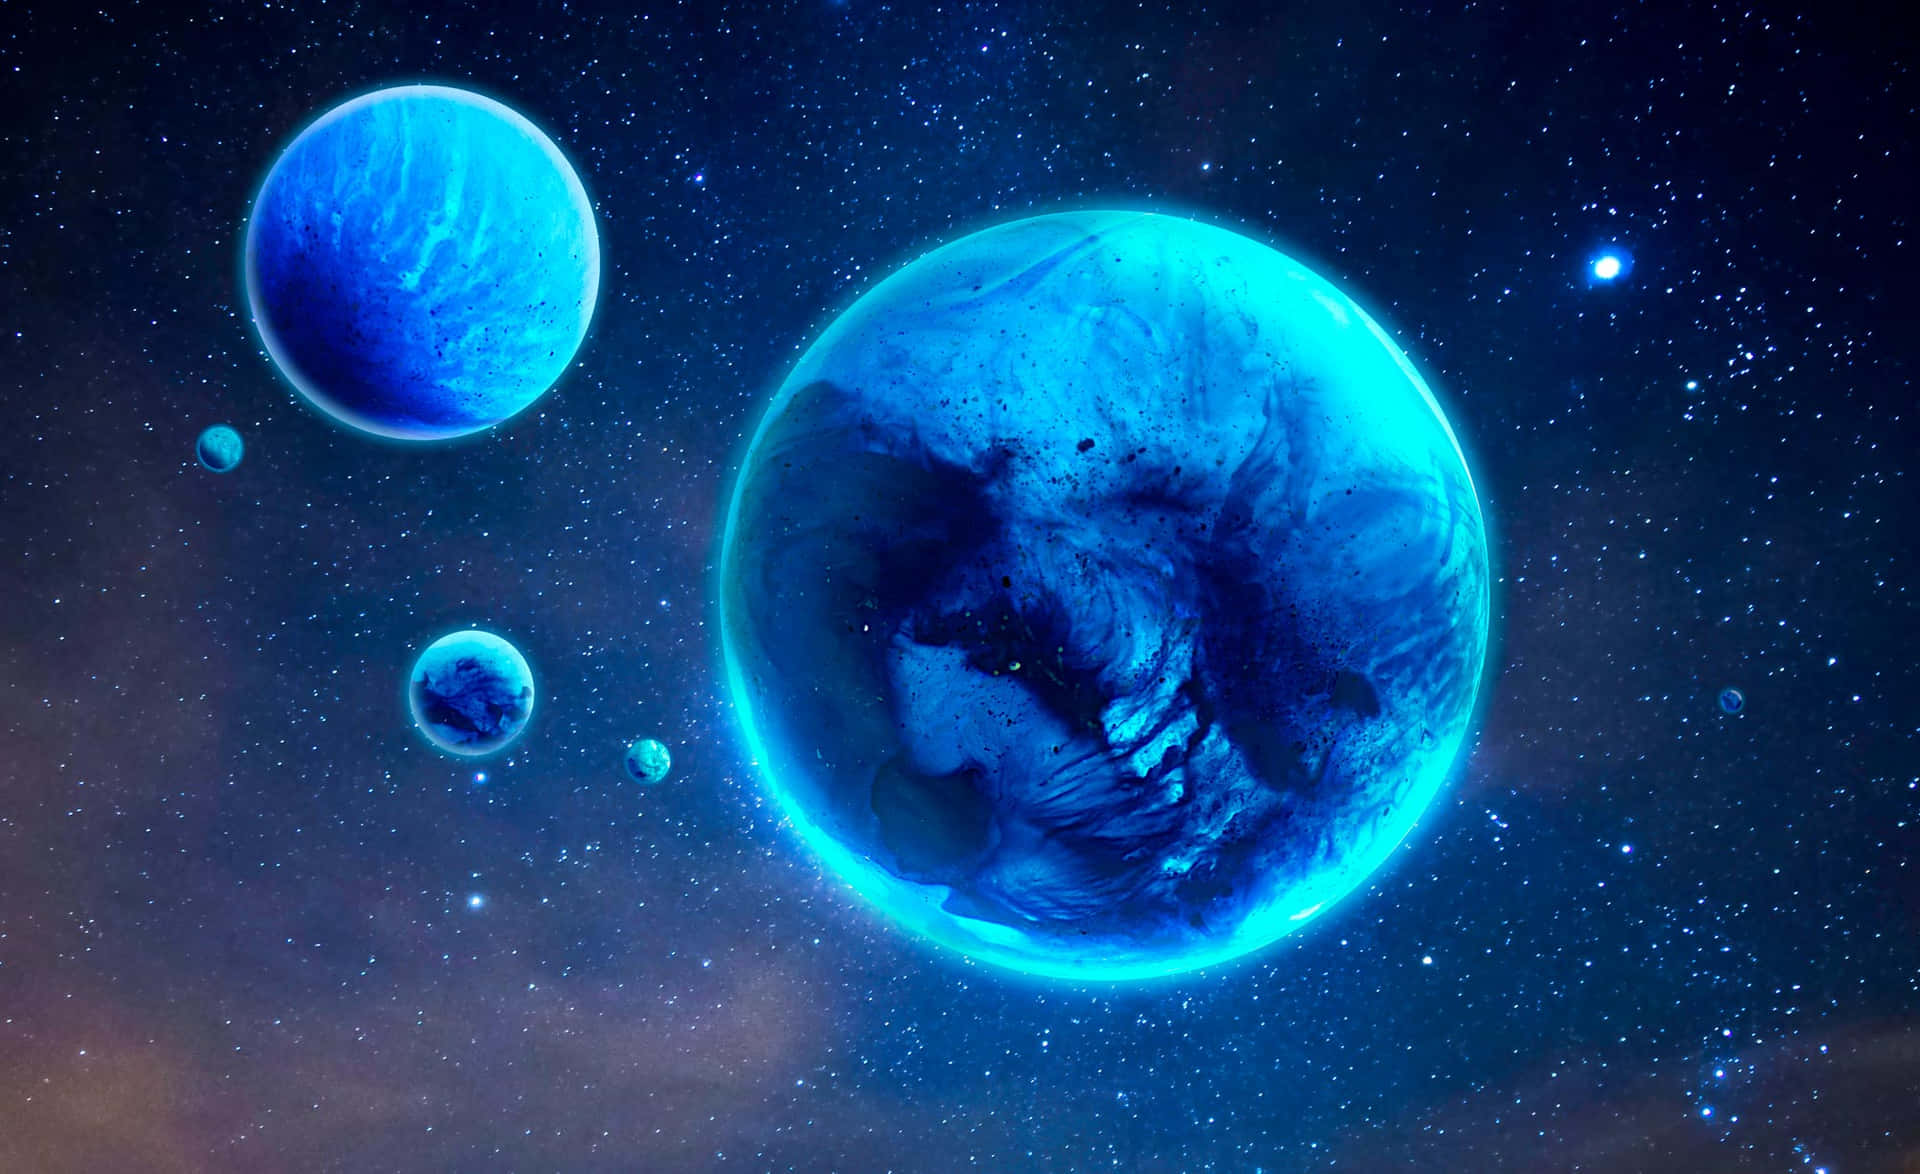 Our dynamic blue planet - the beauty of Earth Wallpaper